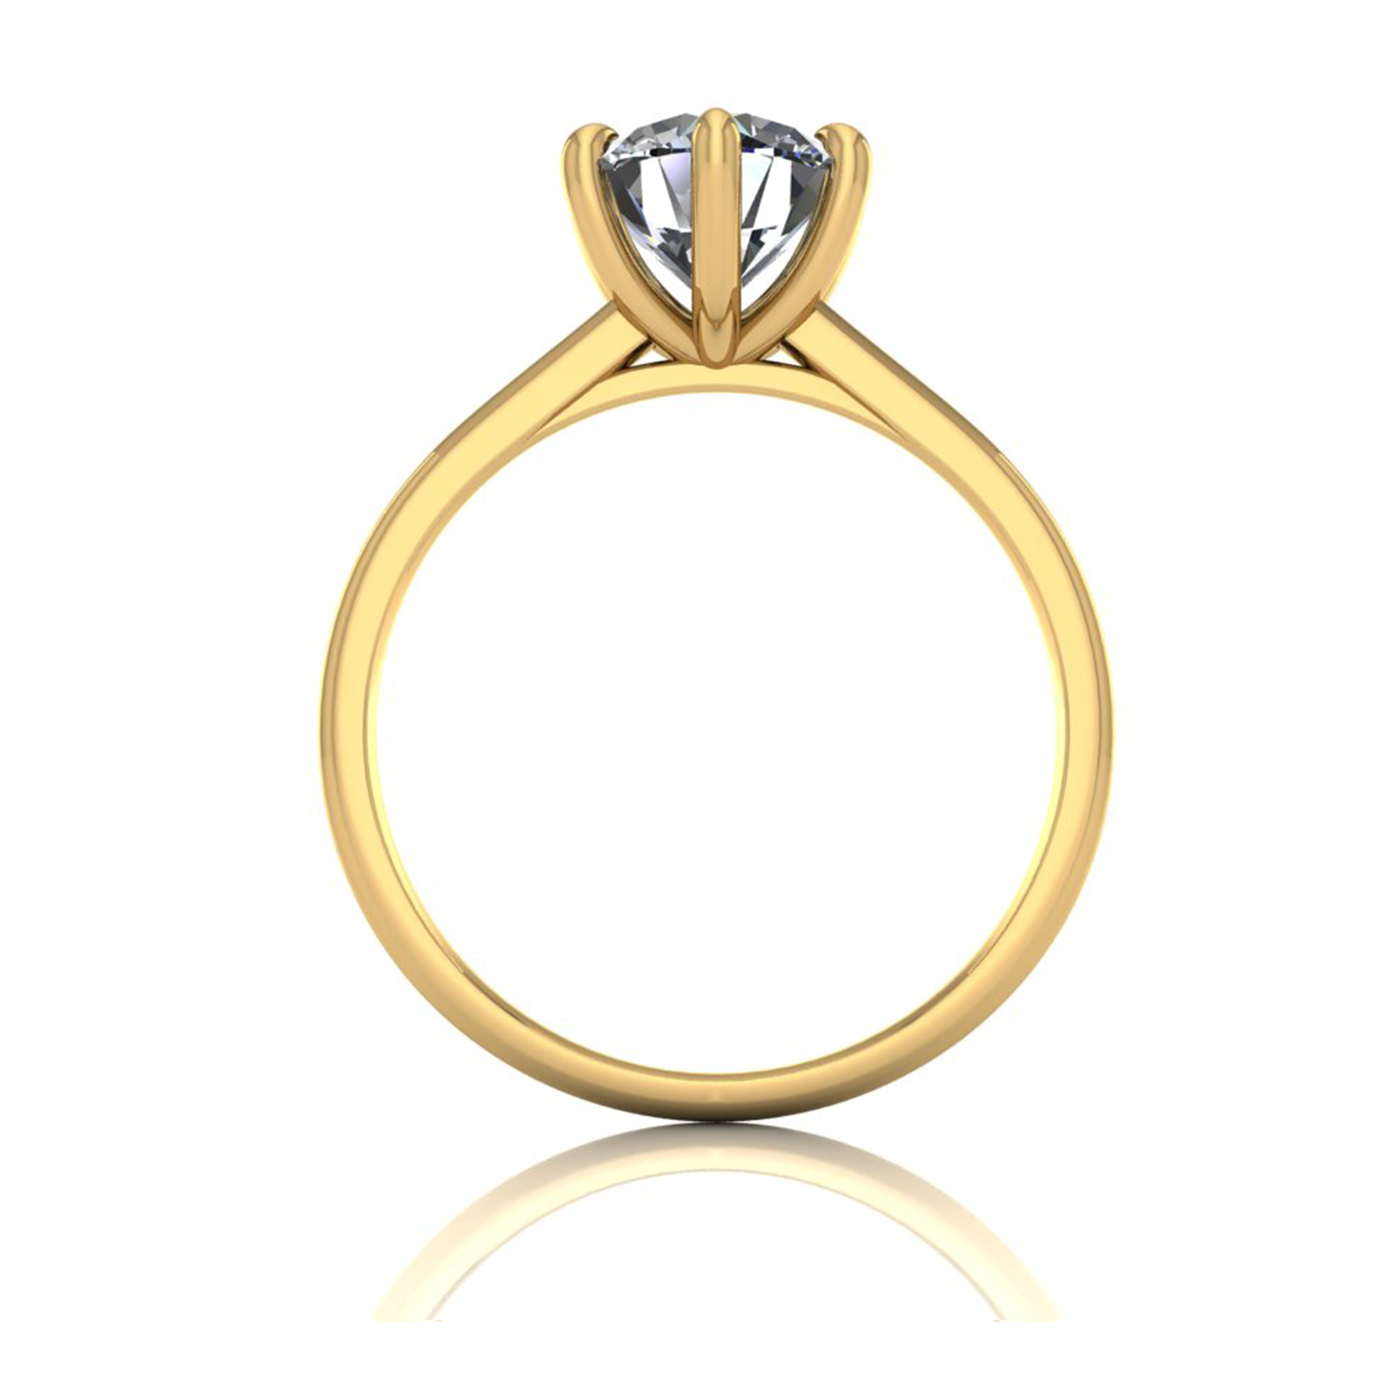 18k yellow gold 1,50 ct 6 prongs solitaire round cut diamond engagement ring with whisper thin band